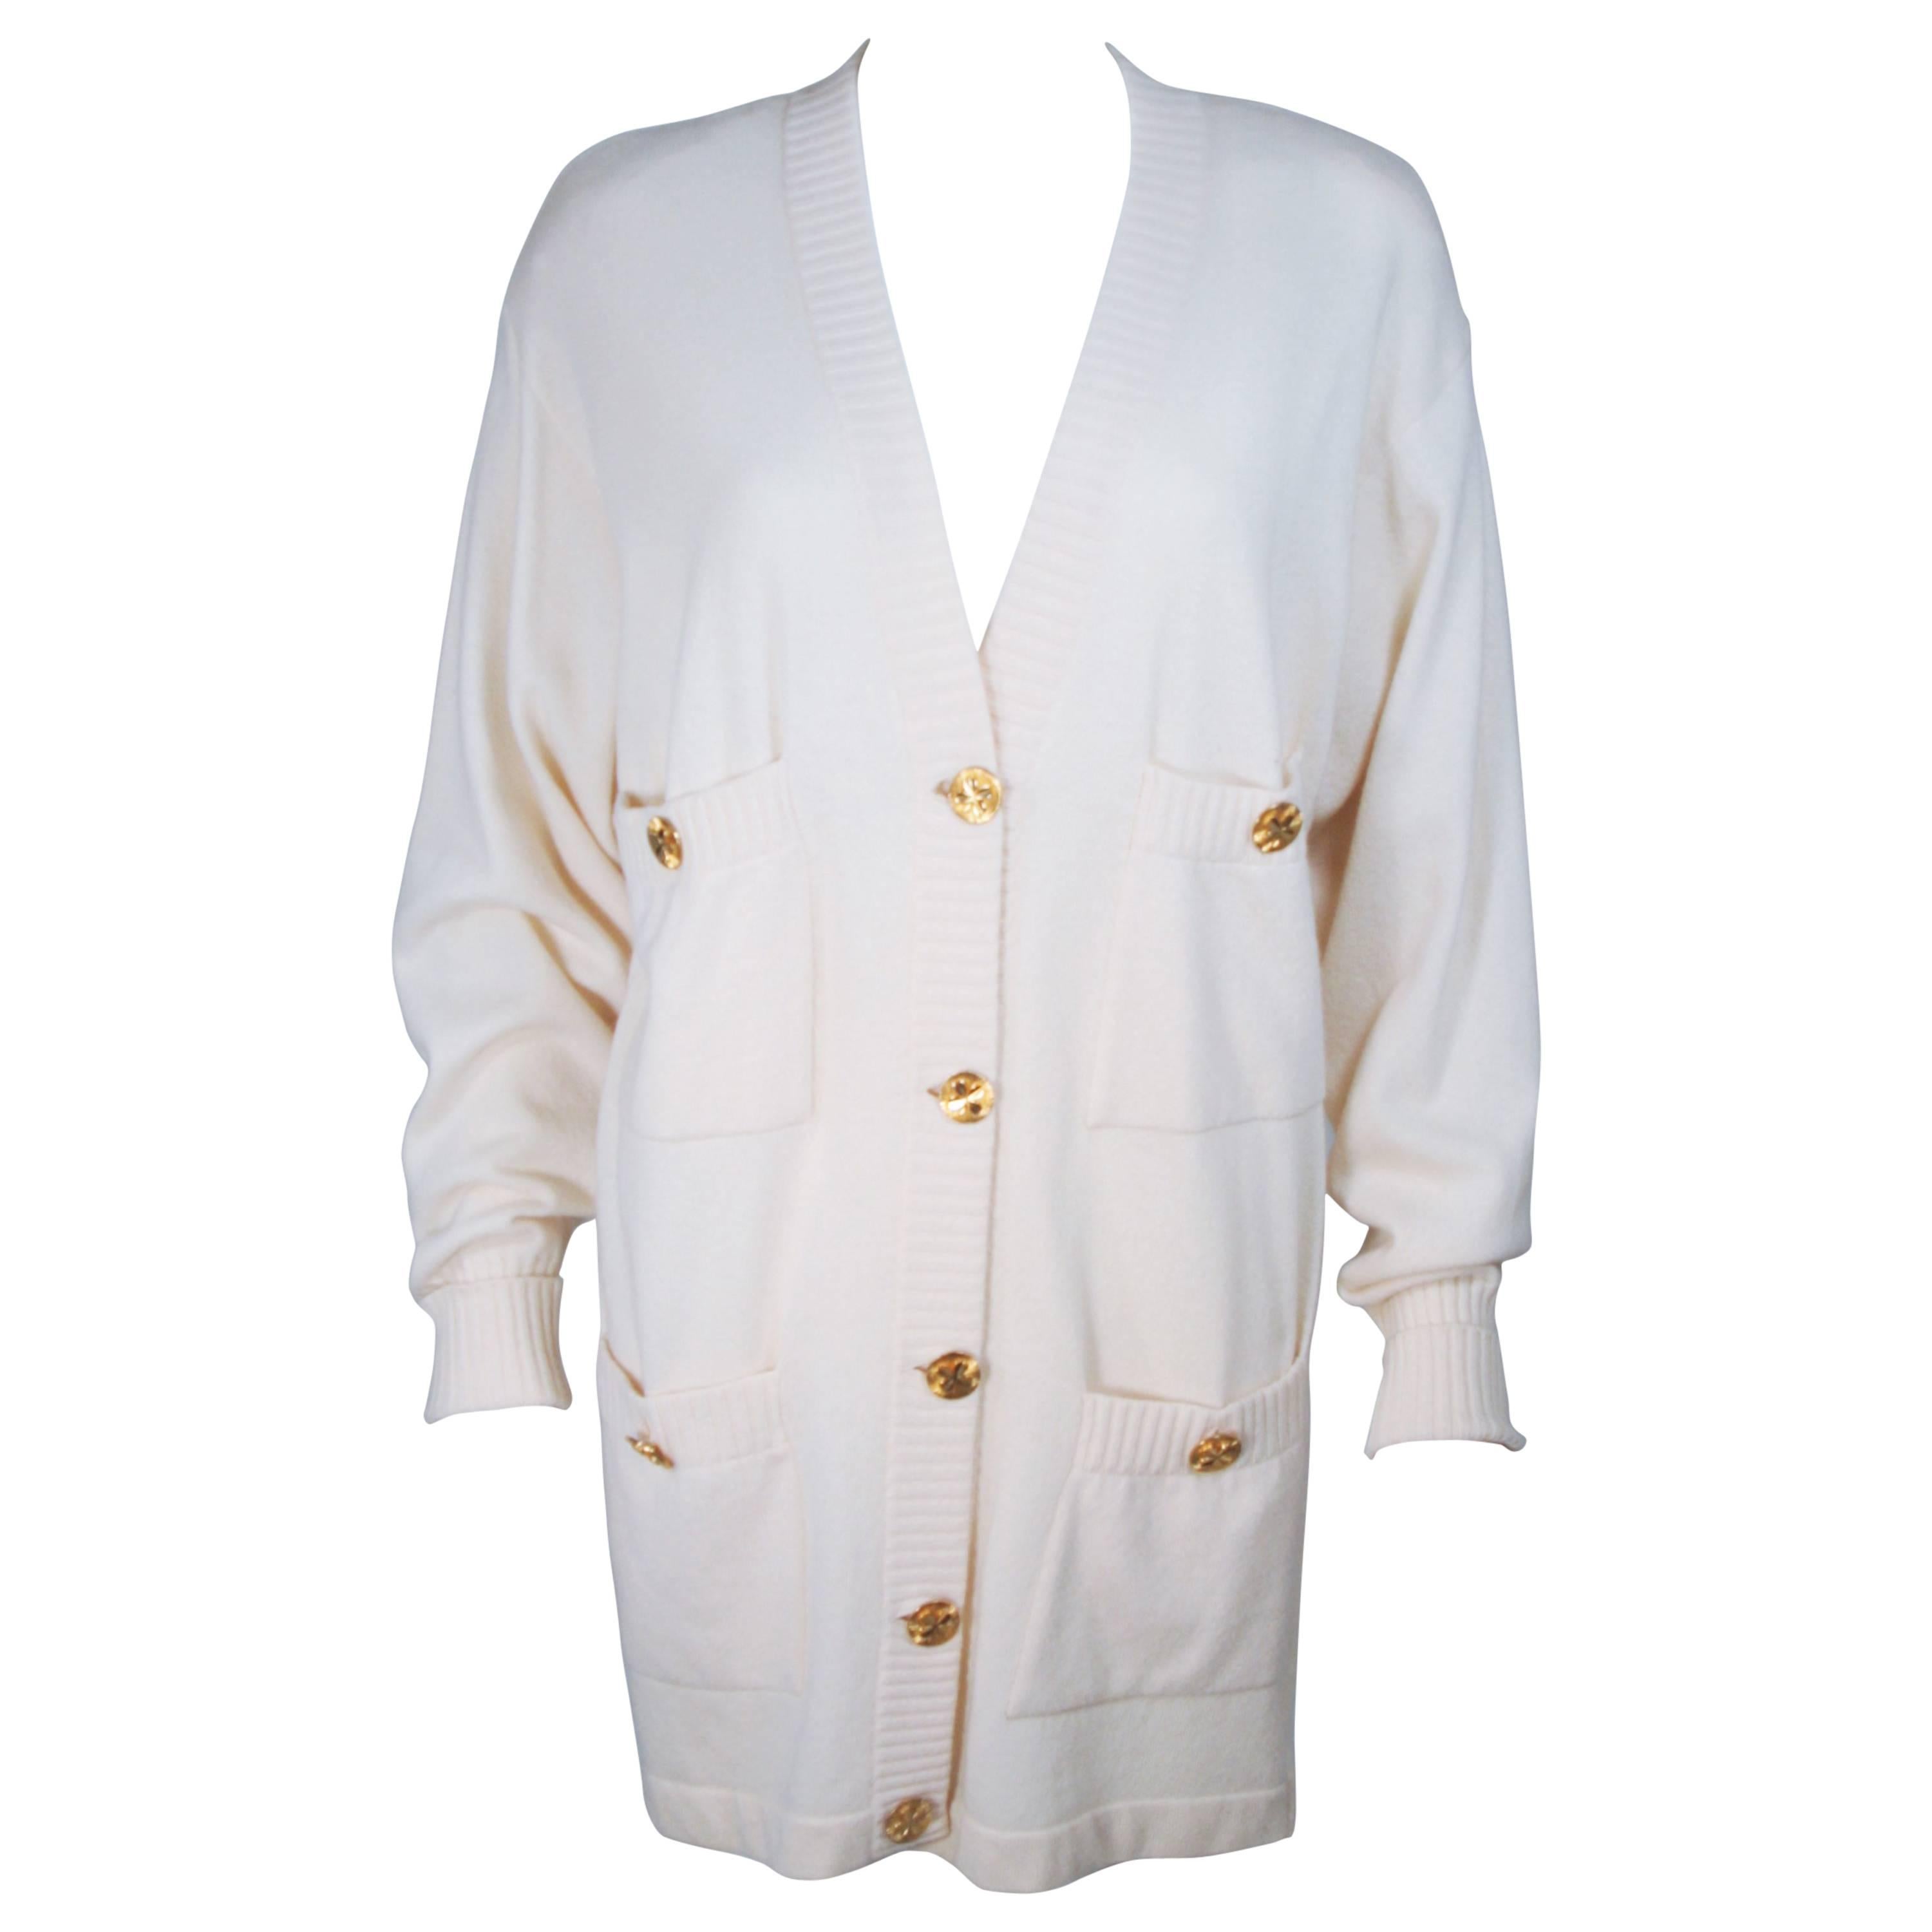 CHANEL Cream Cashmere Cardigan with Gold Buttons Size 36